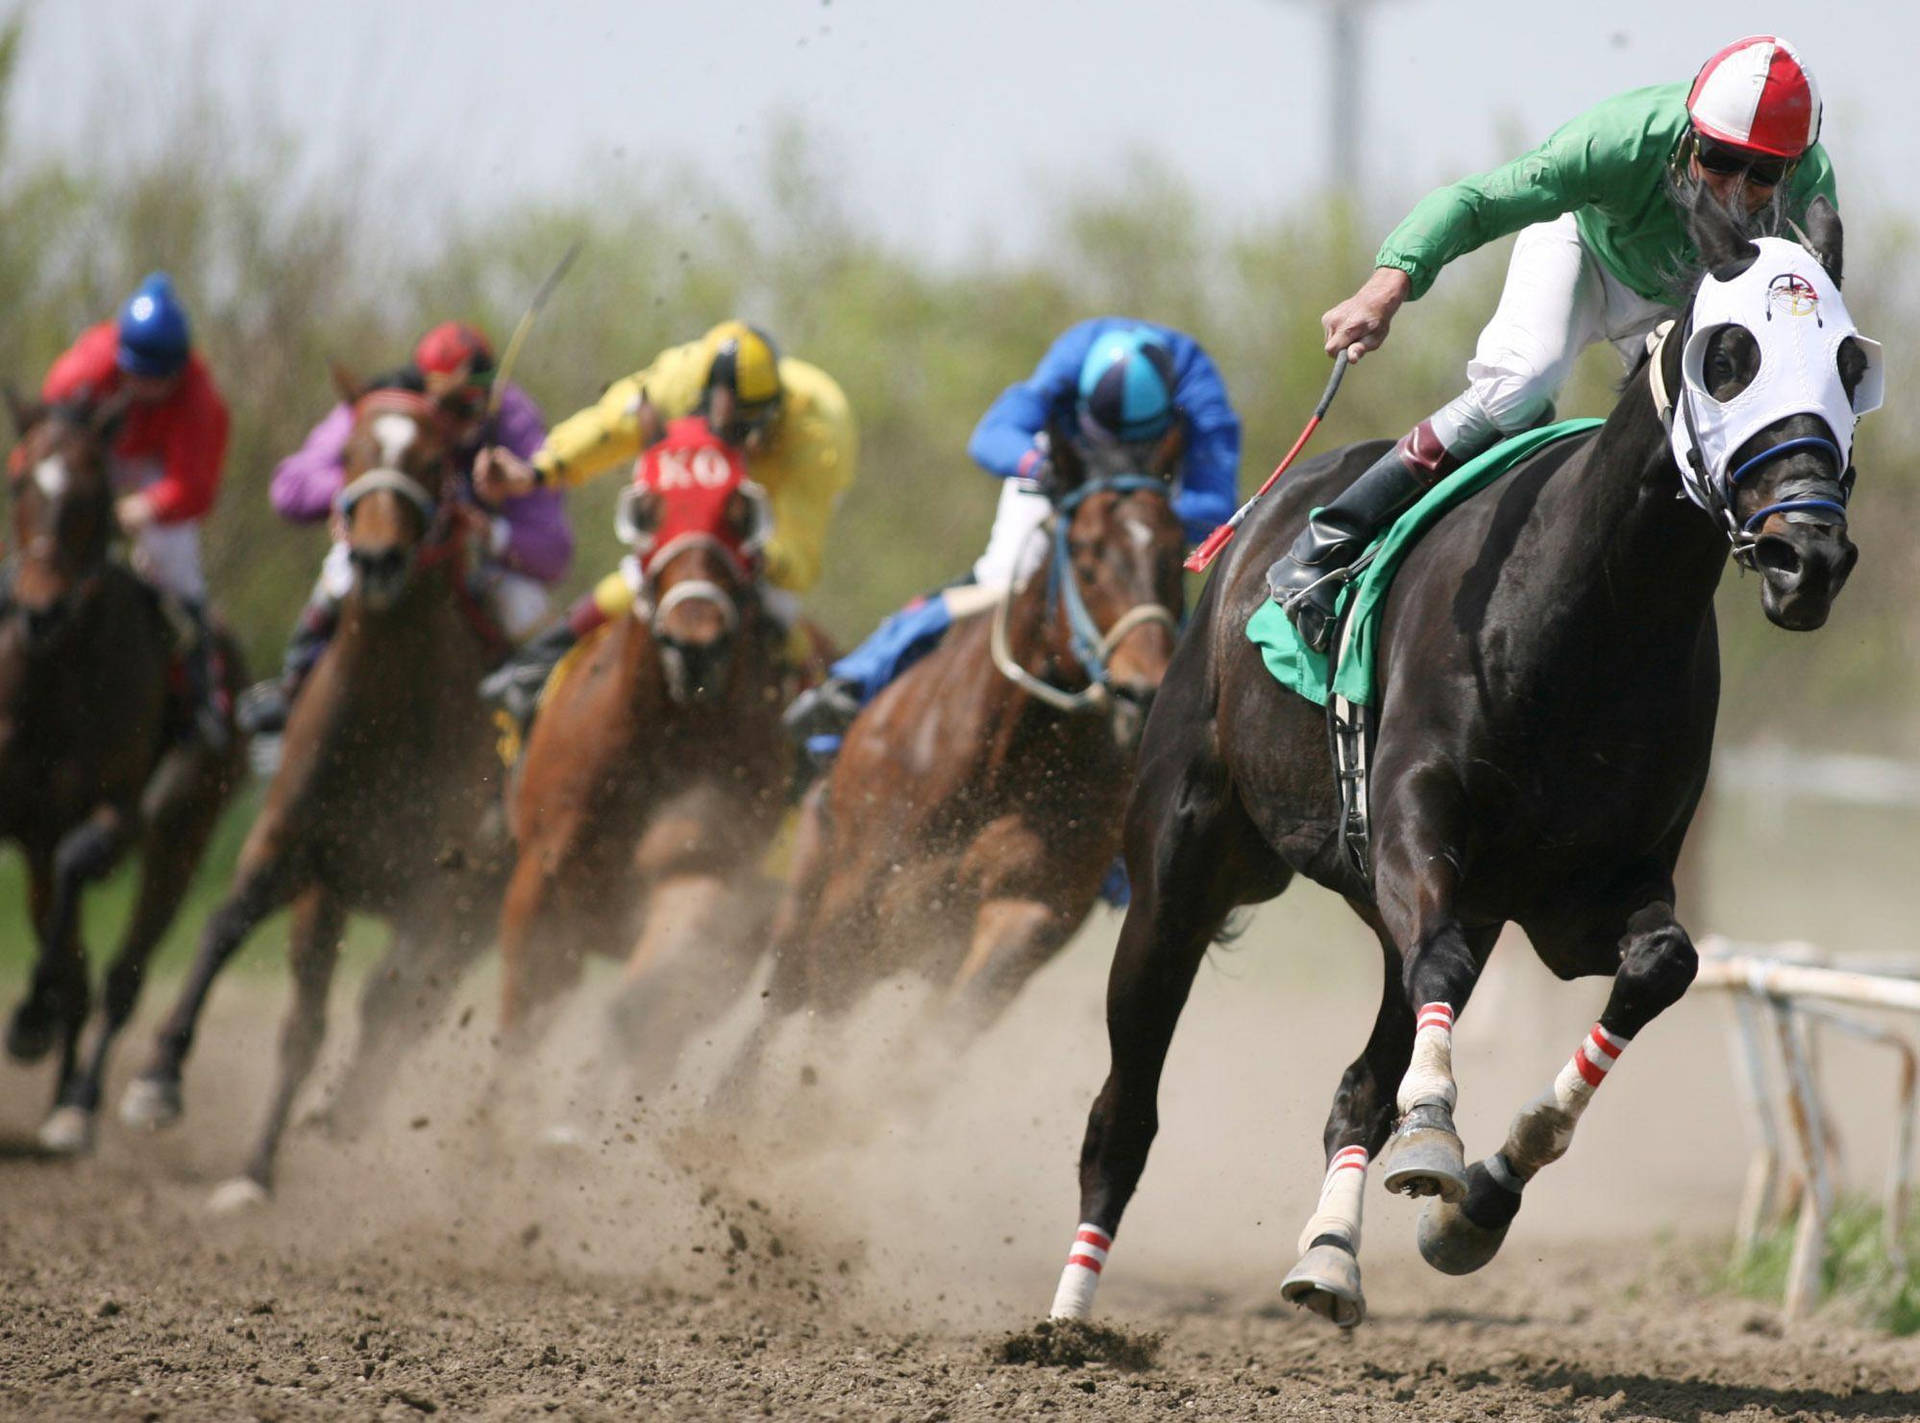 Masked Horses In A Horse Racing Wallpaper